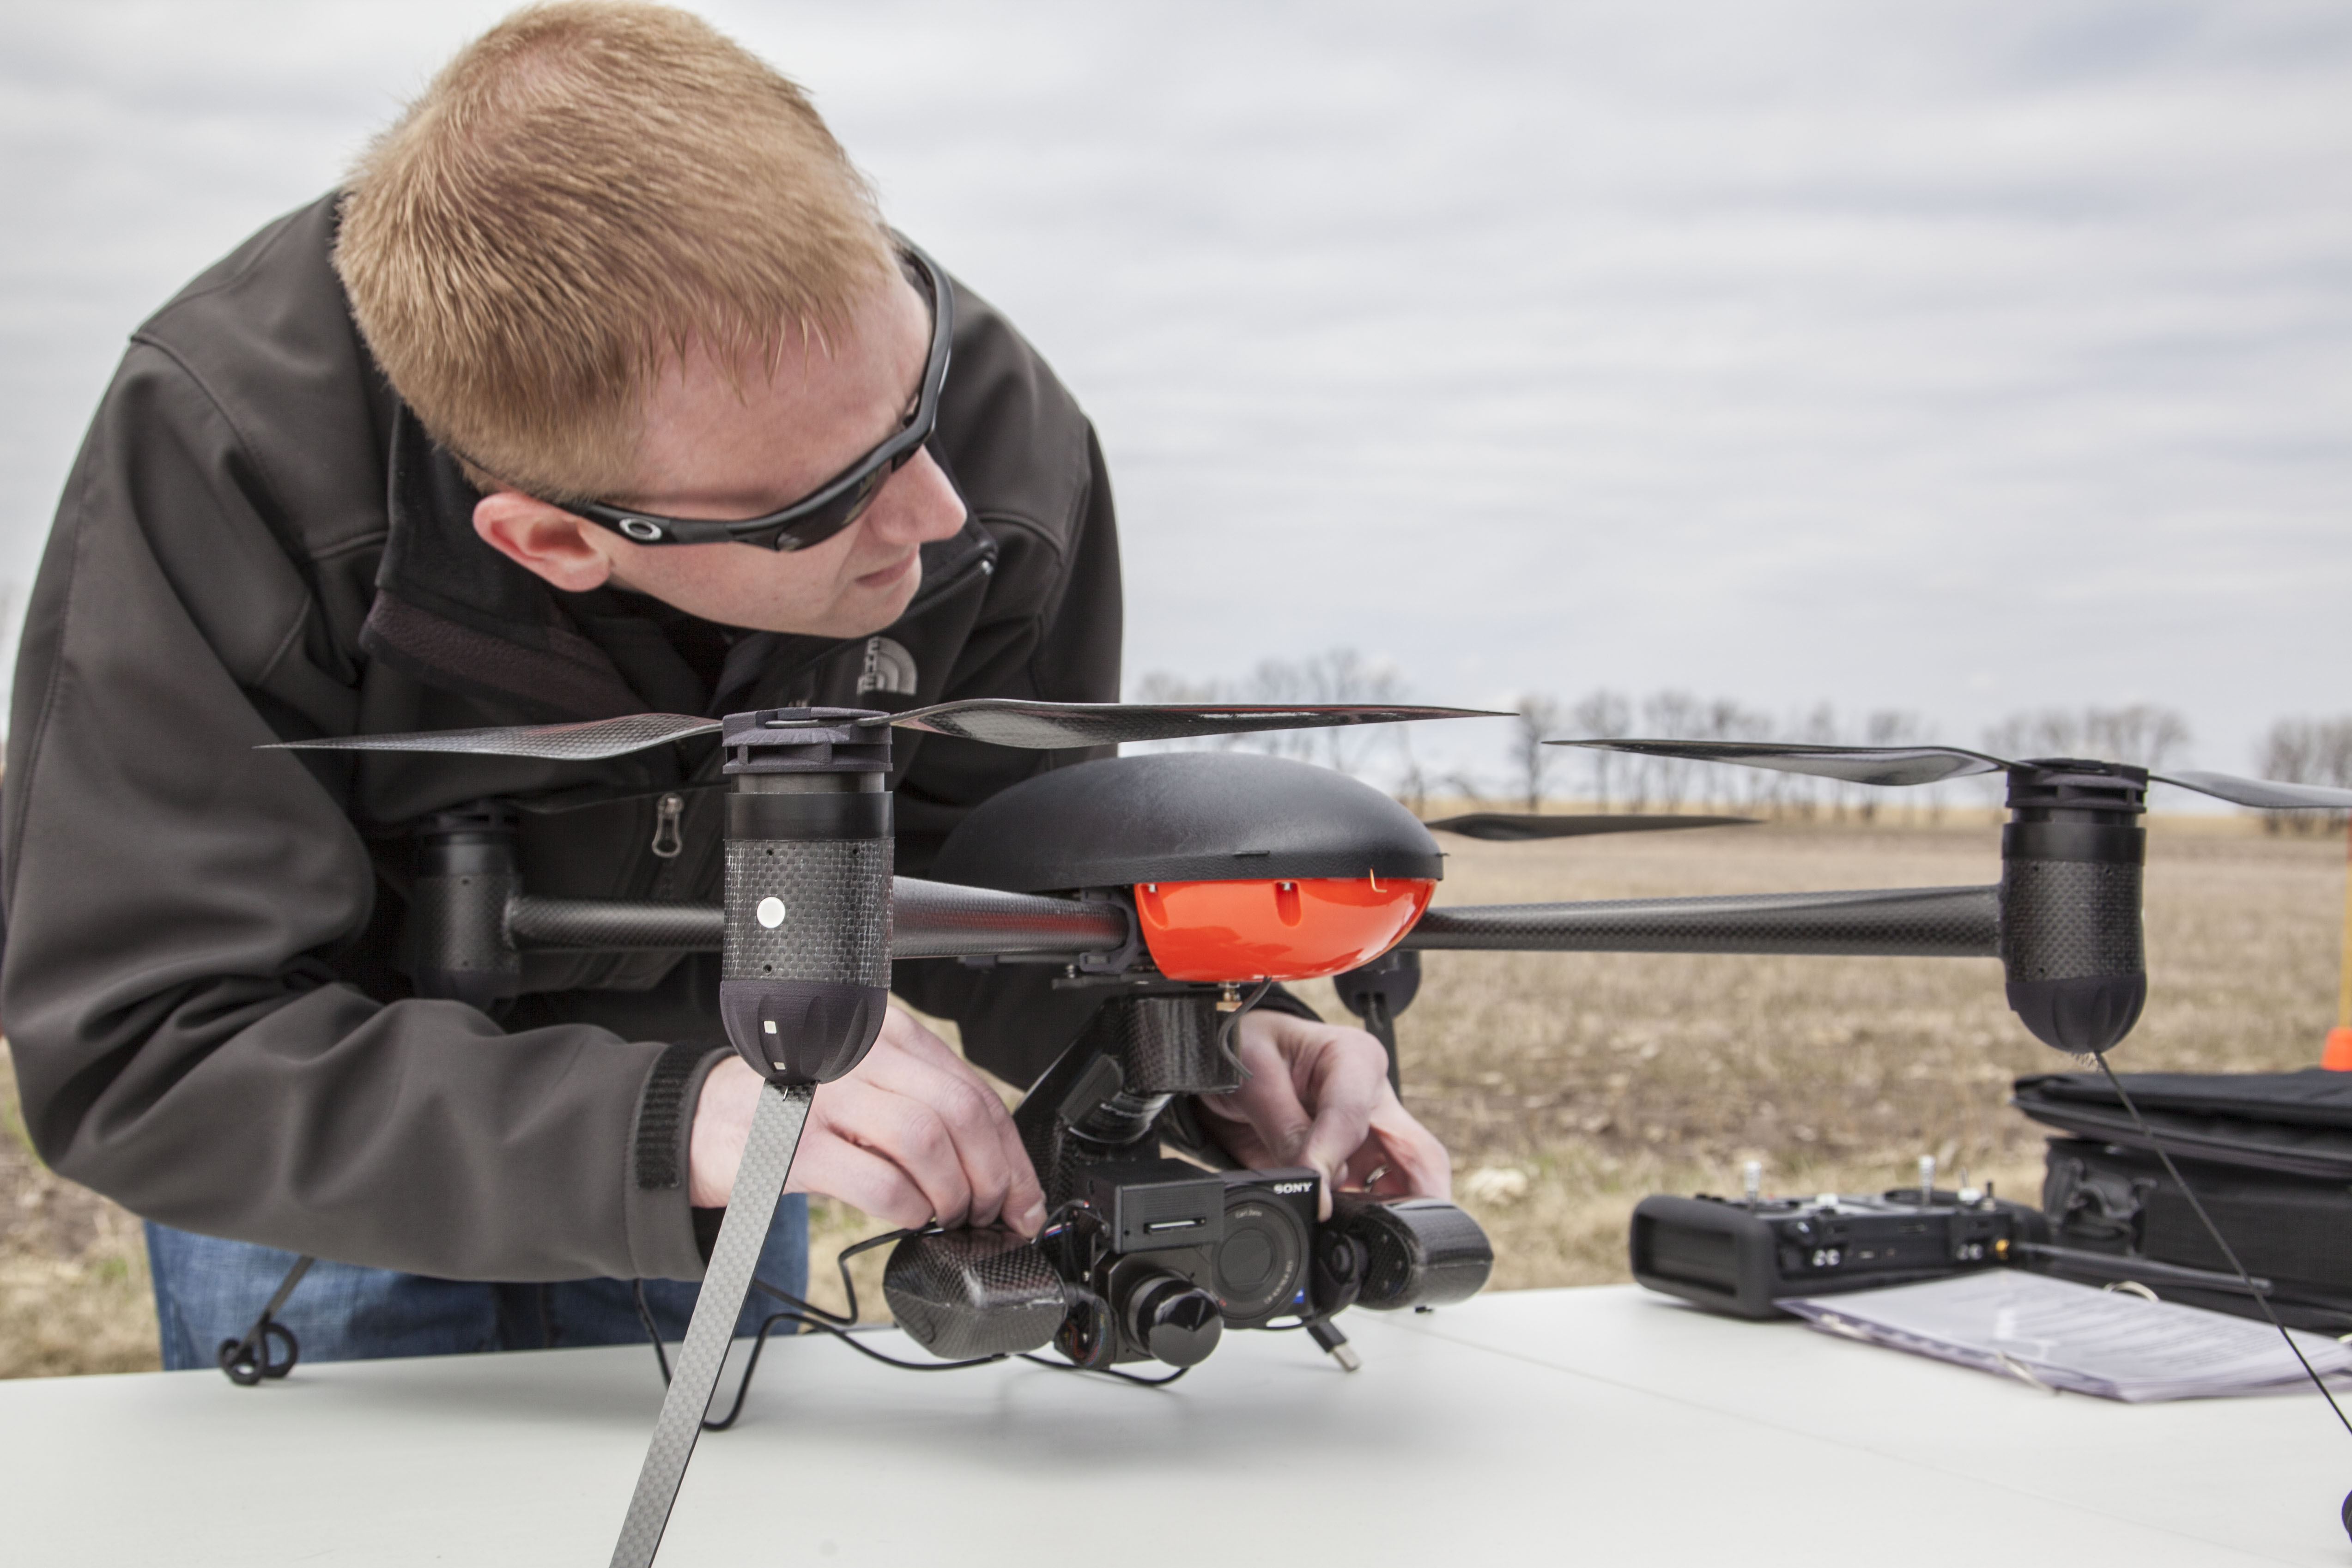 Trevor Woods of the UND Center for Unmanned Aircraft Systems Research, Education and Training is checking the camera on an unmanned aircraft system that's being used in a research project at NDSU's Carrington Research Extension Center. (NDSU photo)